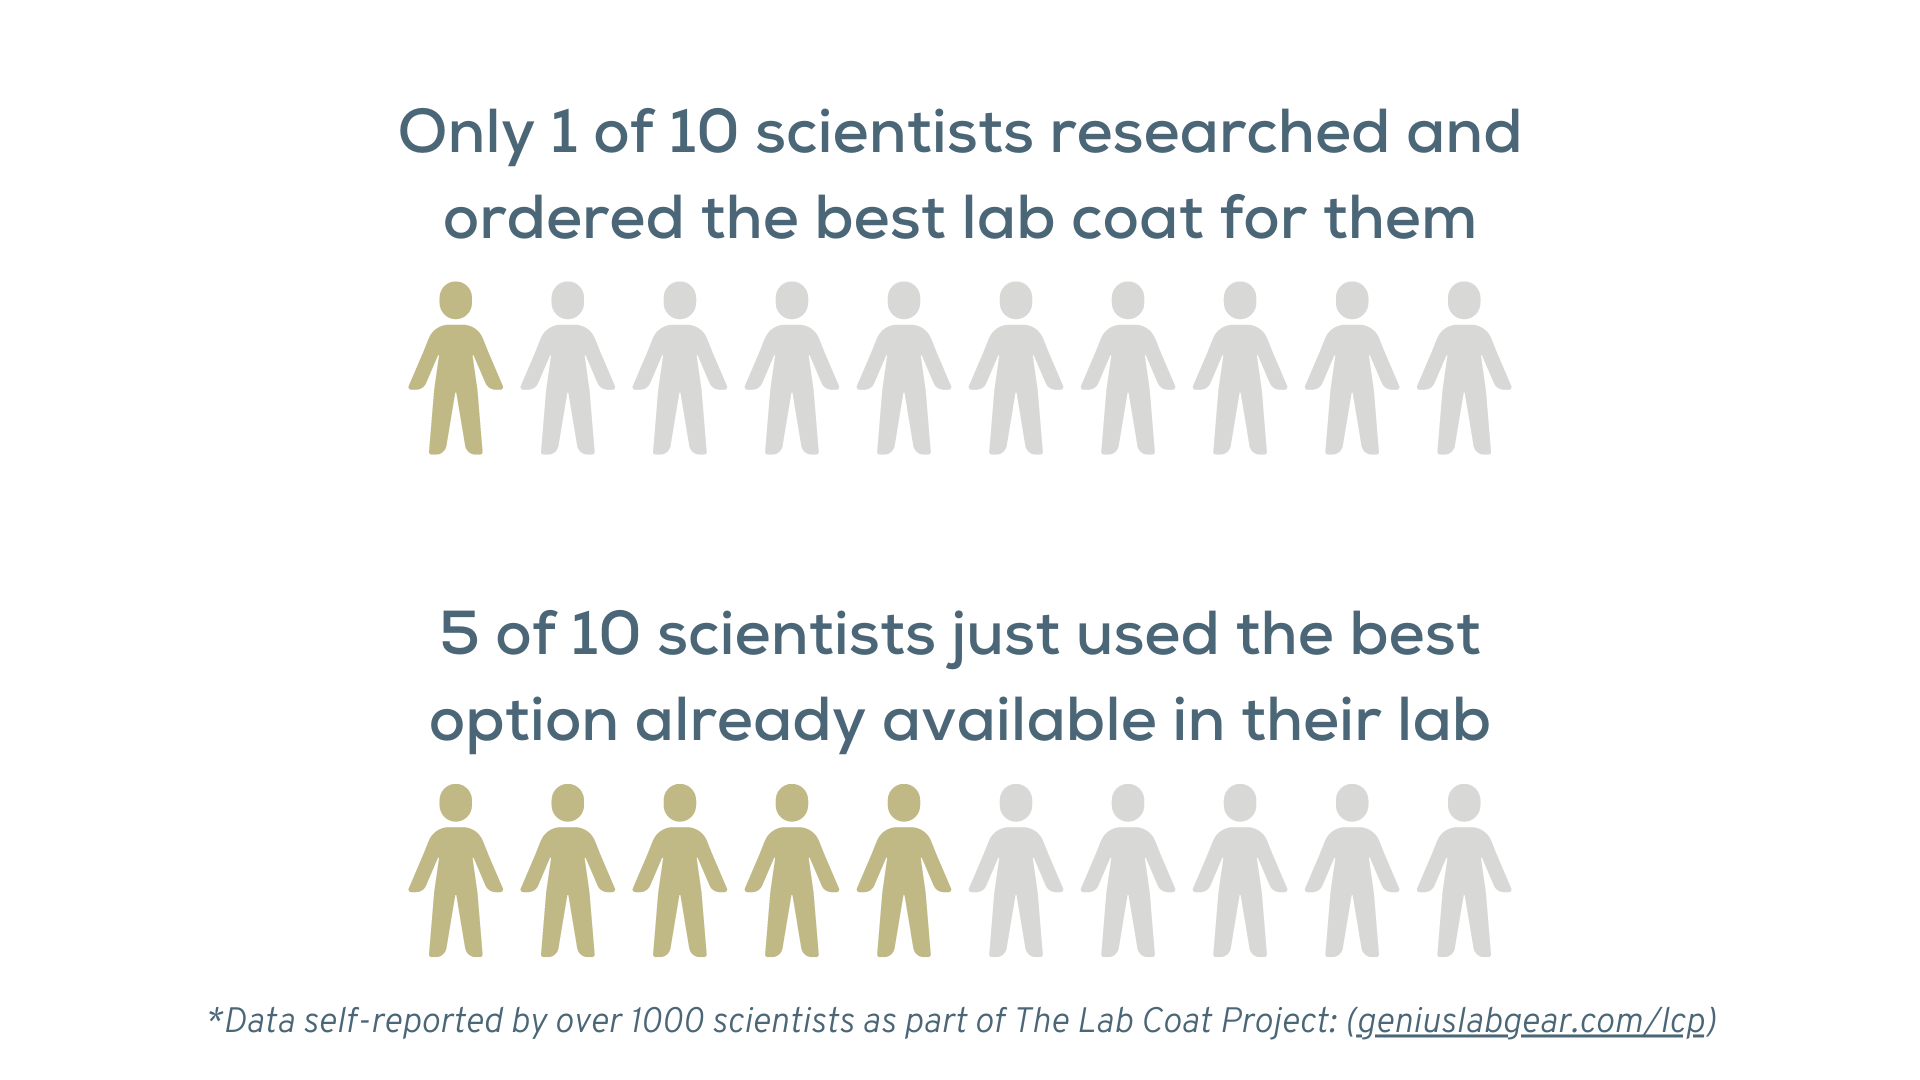 1 in 10 scientists researched and ordered the best lab coat for them